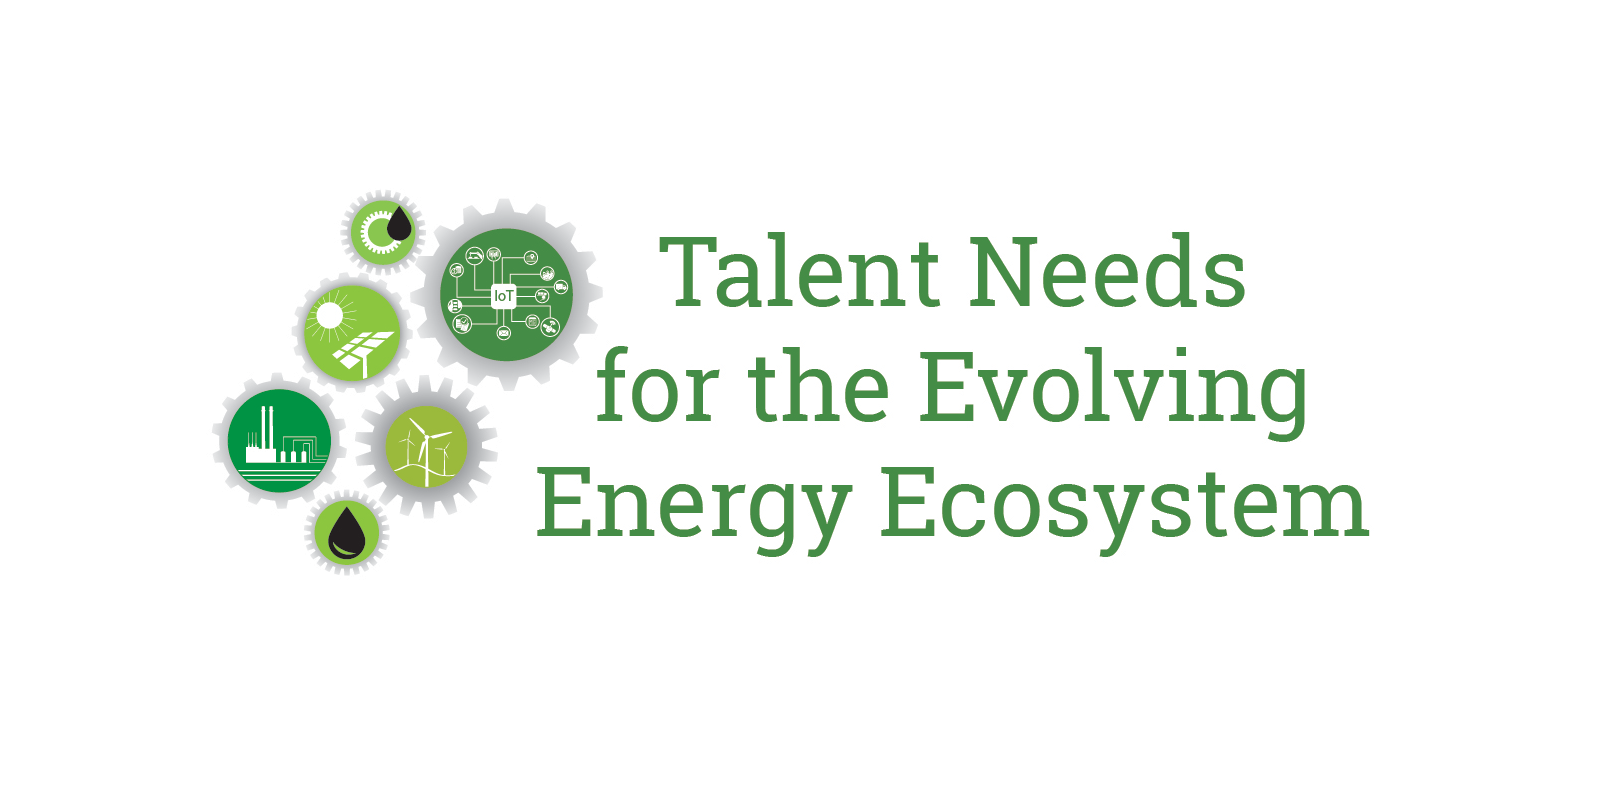 Talent Needs for the Evolving Energy Ecosystem